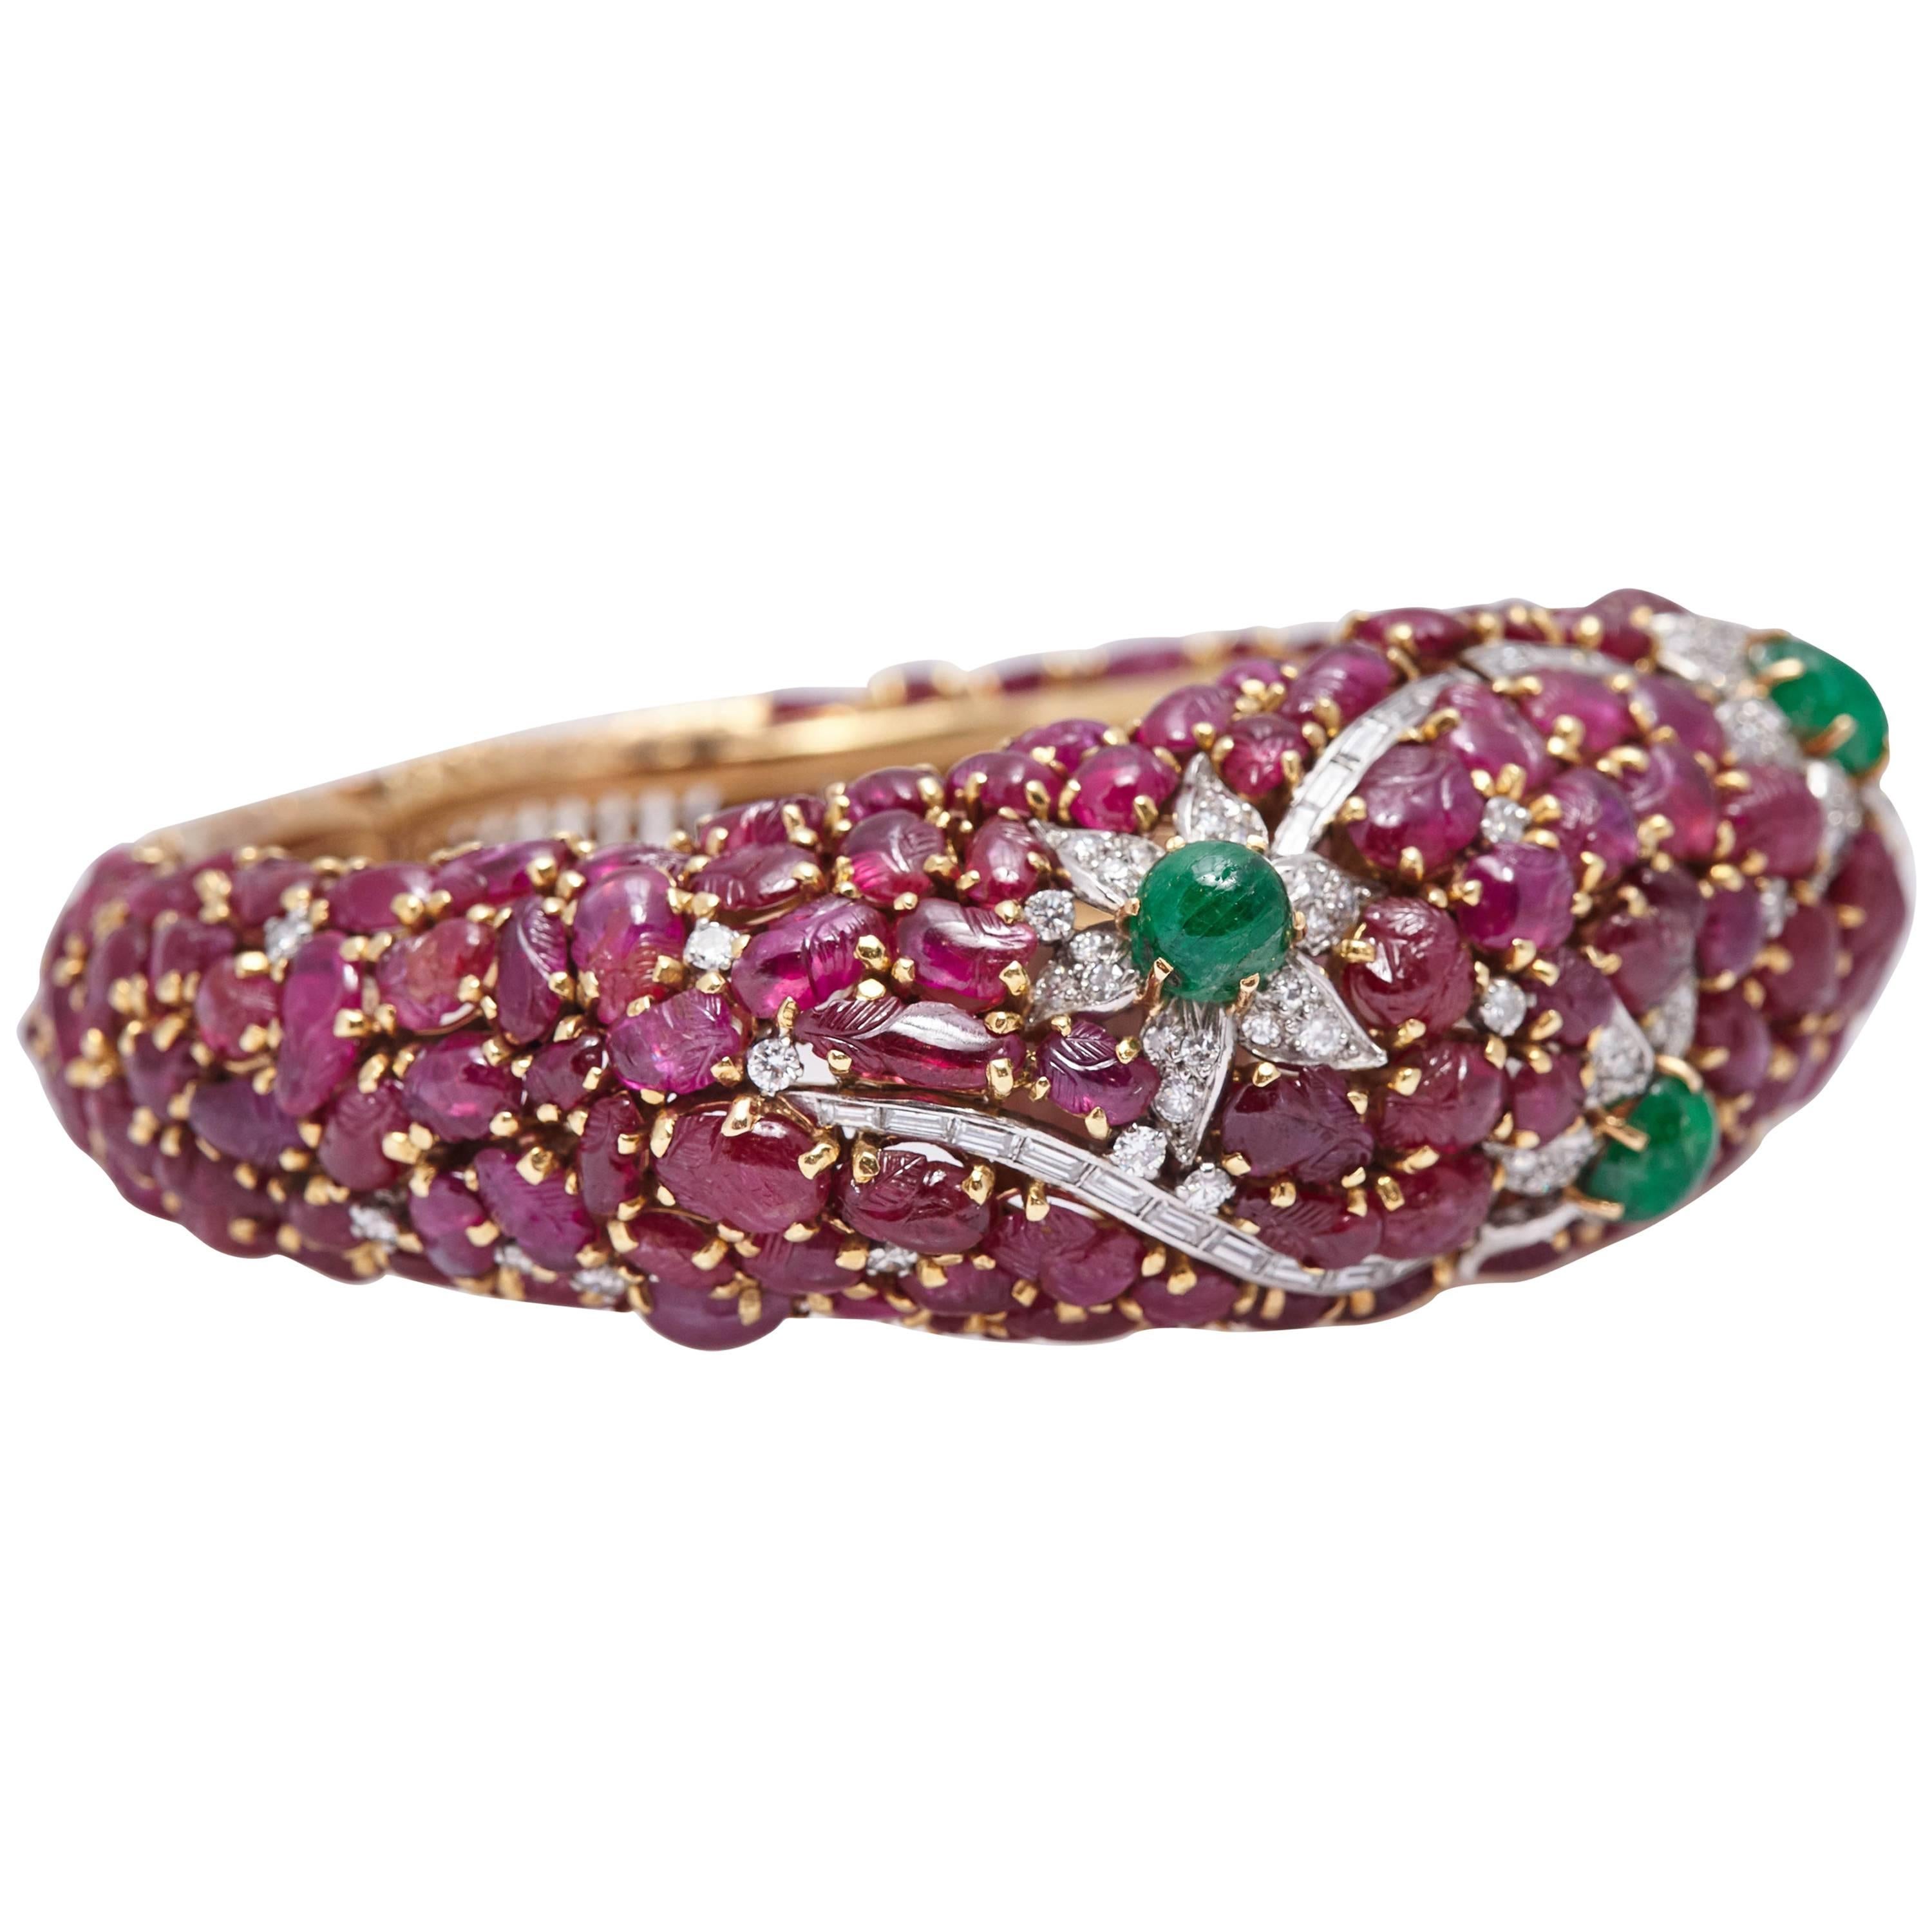 Carved Ruby Emerald and Diamond Cuff Bracelet